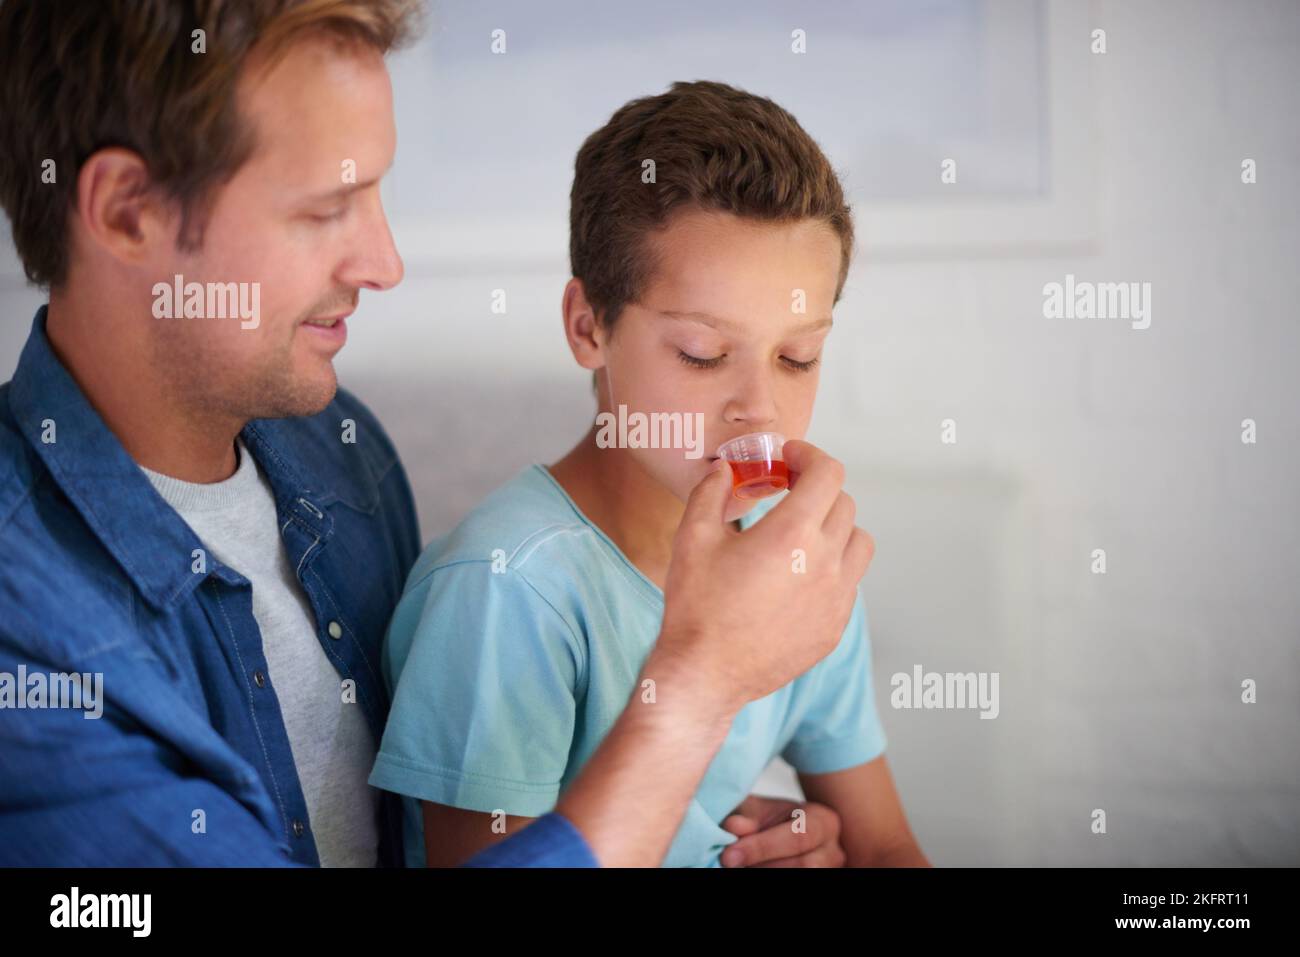 Youll feel better once youve had this. a caring father giving his sick little boy some medicine at home. Stock Photo